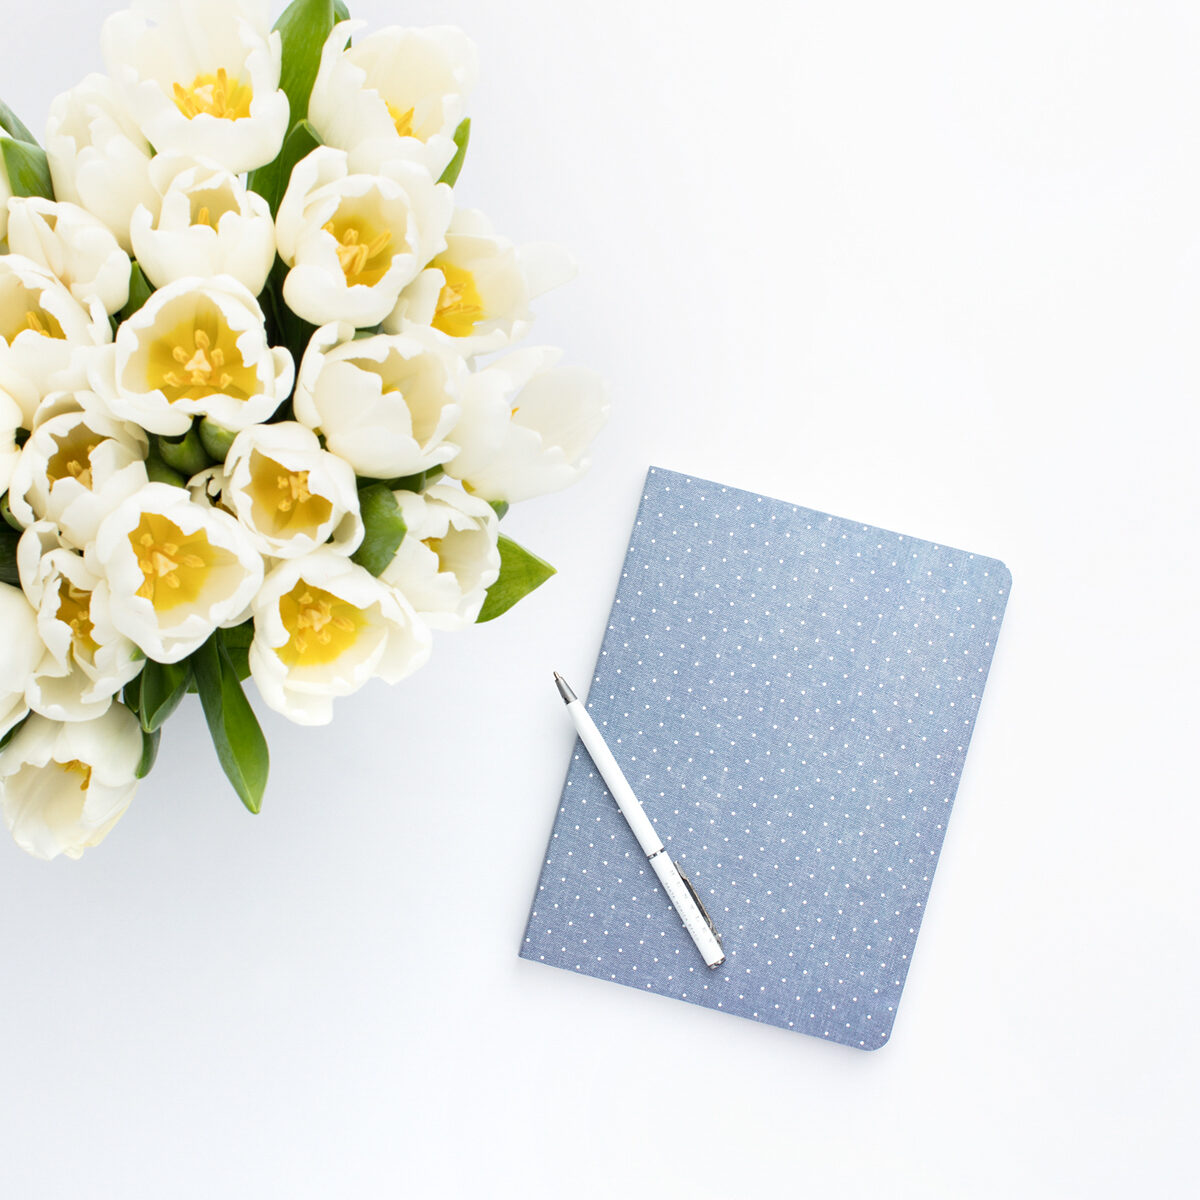 light blue notebook with a pen resting on top and a vase of white flowers to the side.